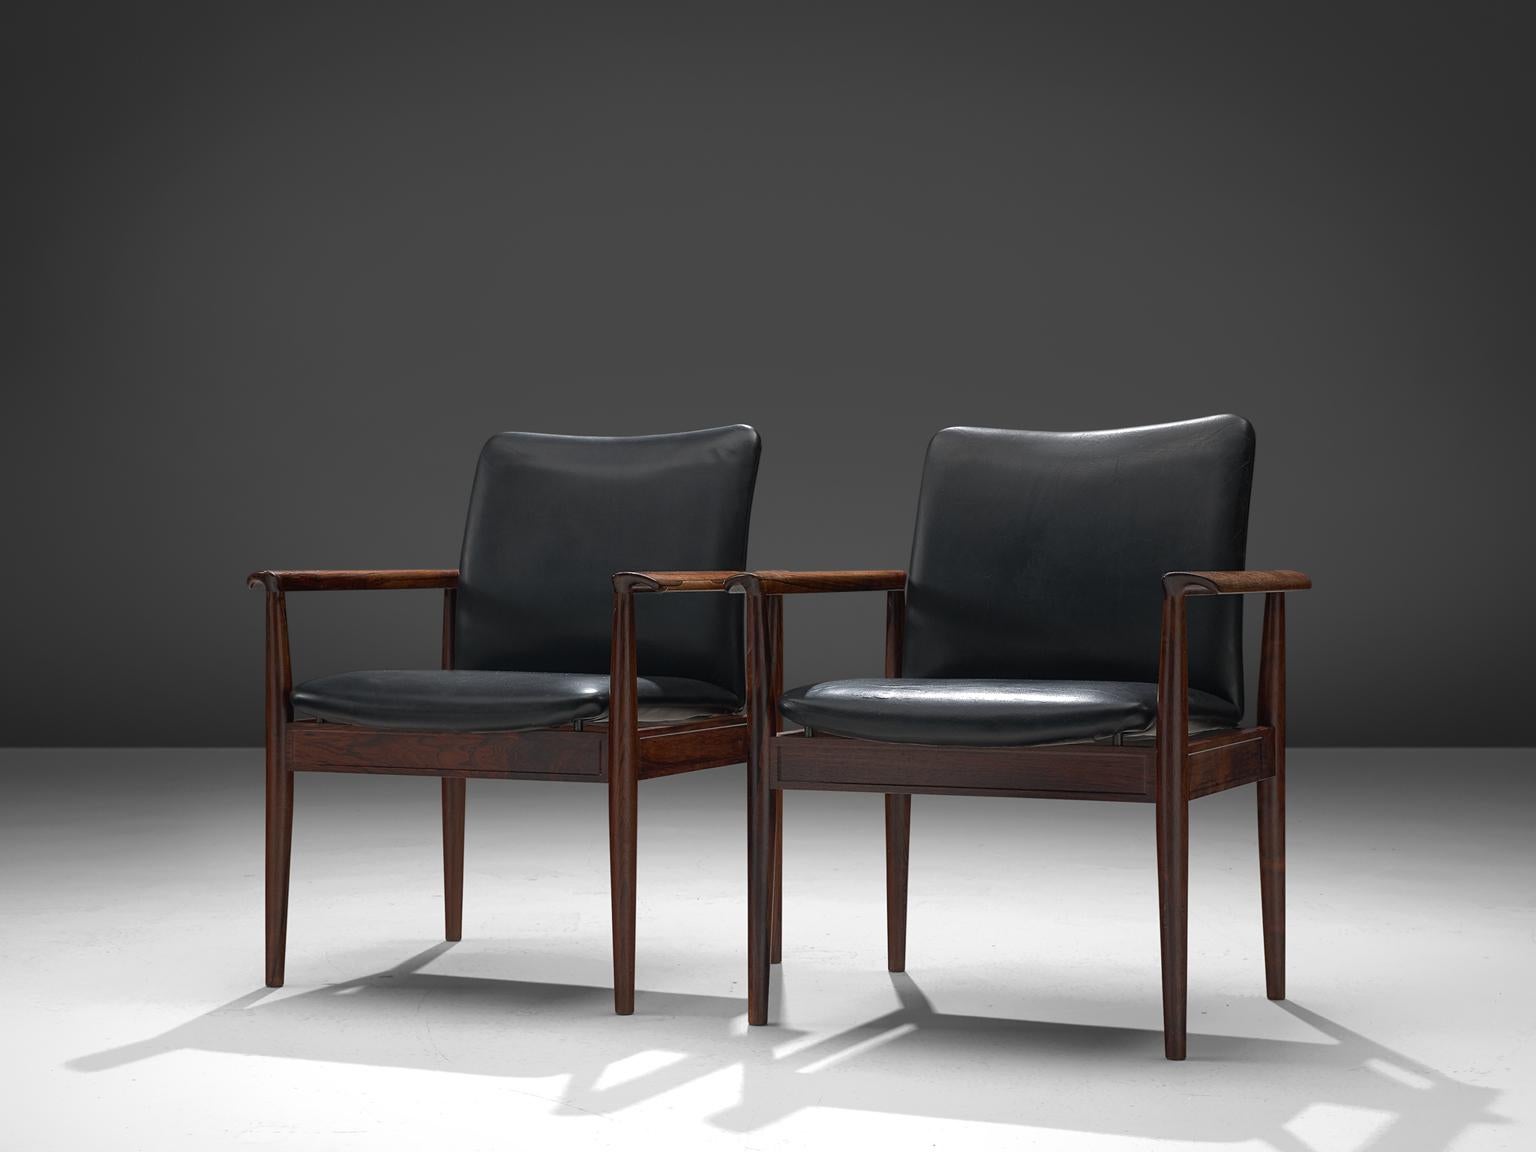 Danish Finn Juhl Set of Diplomat Chairs in Rosewood and Black Leather